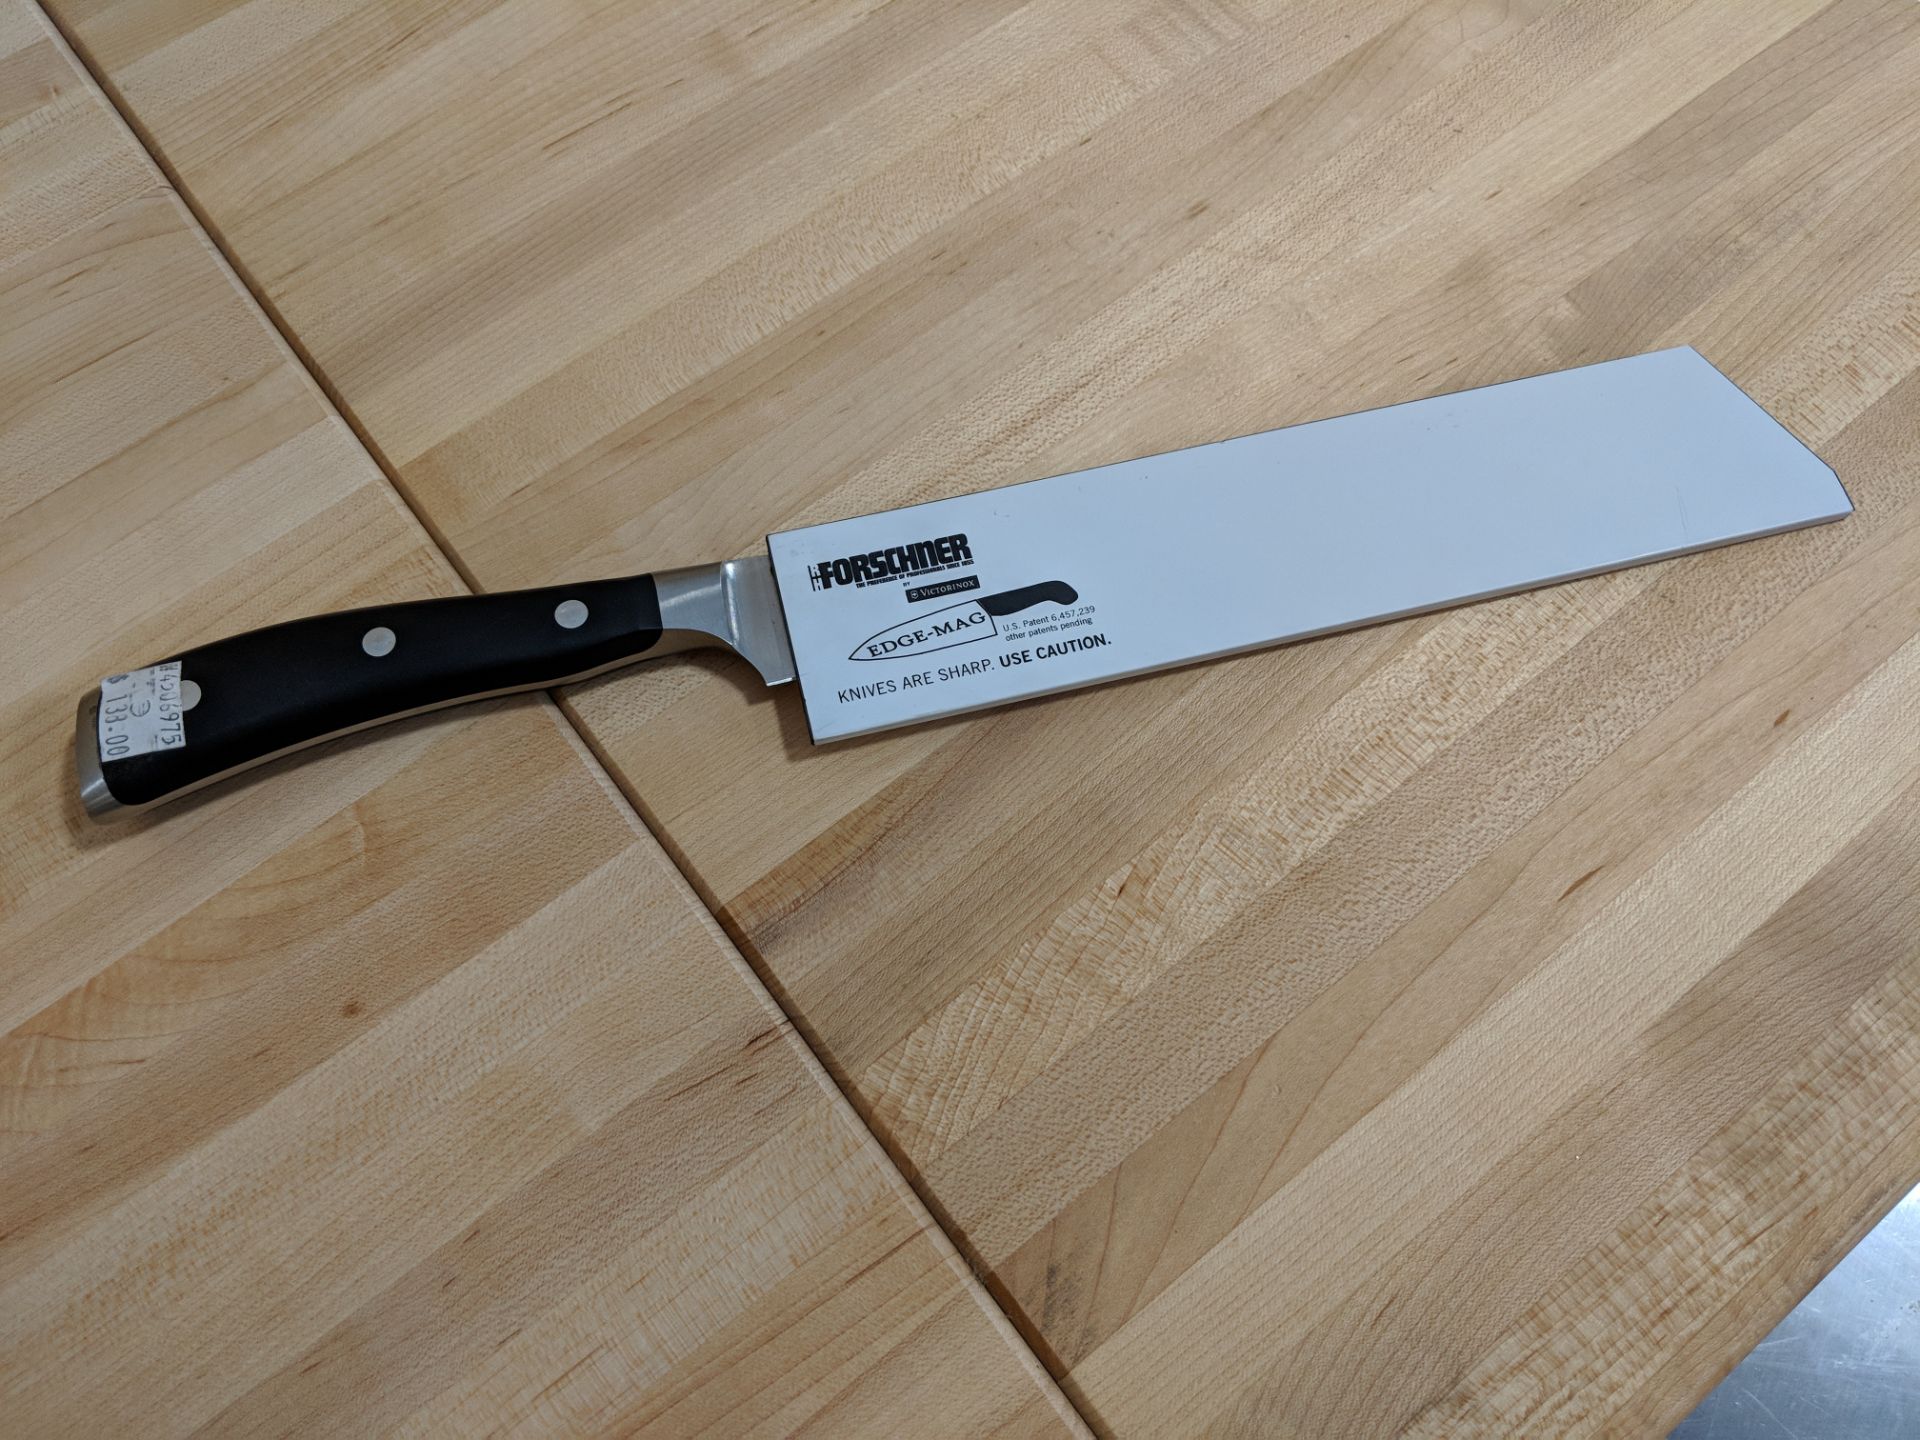 Wusthof 9" Classic Ikon Carving Knife with Guard - 4506-23 - Image 3 of 3